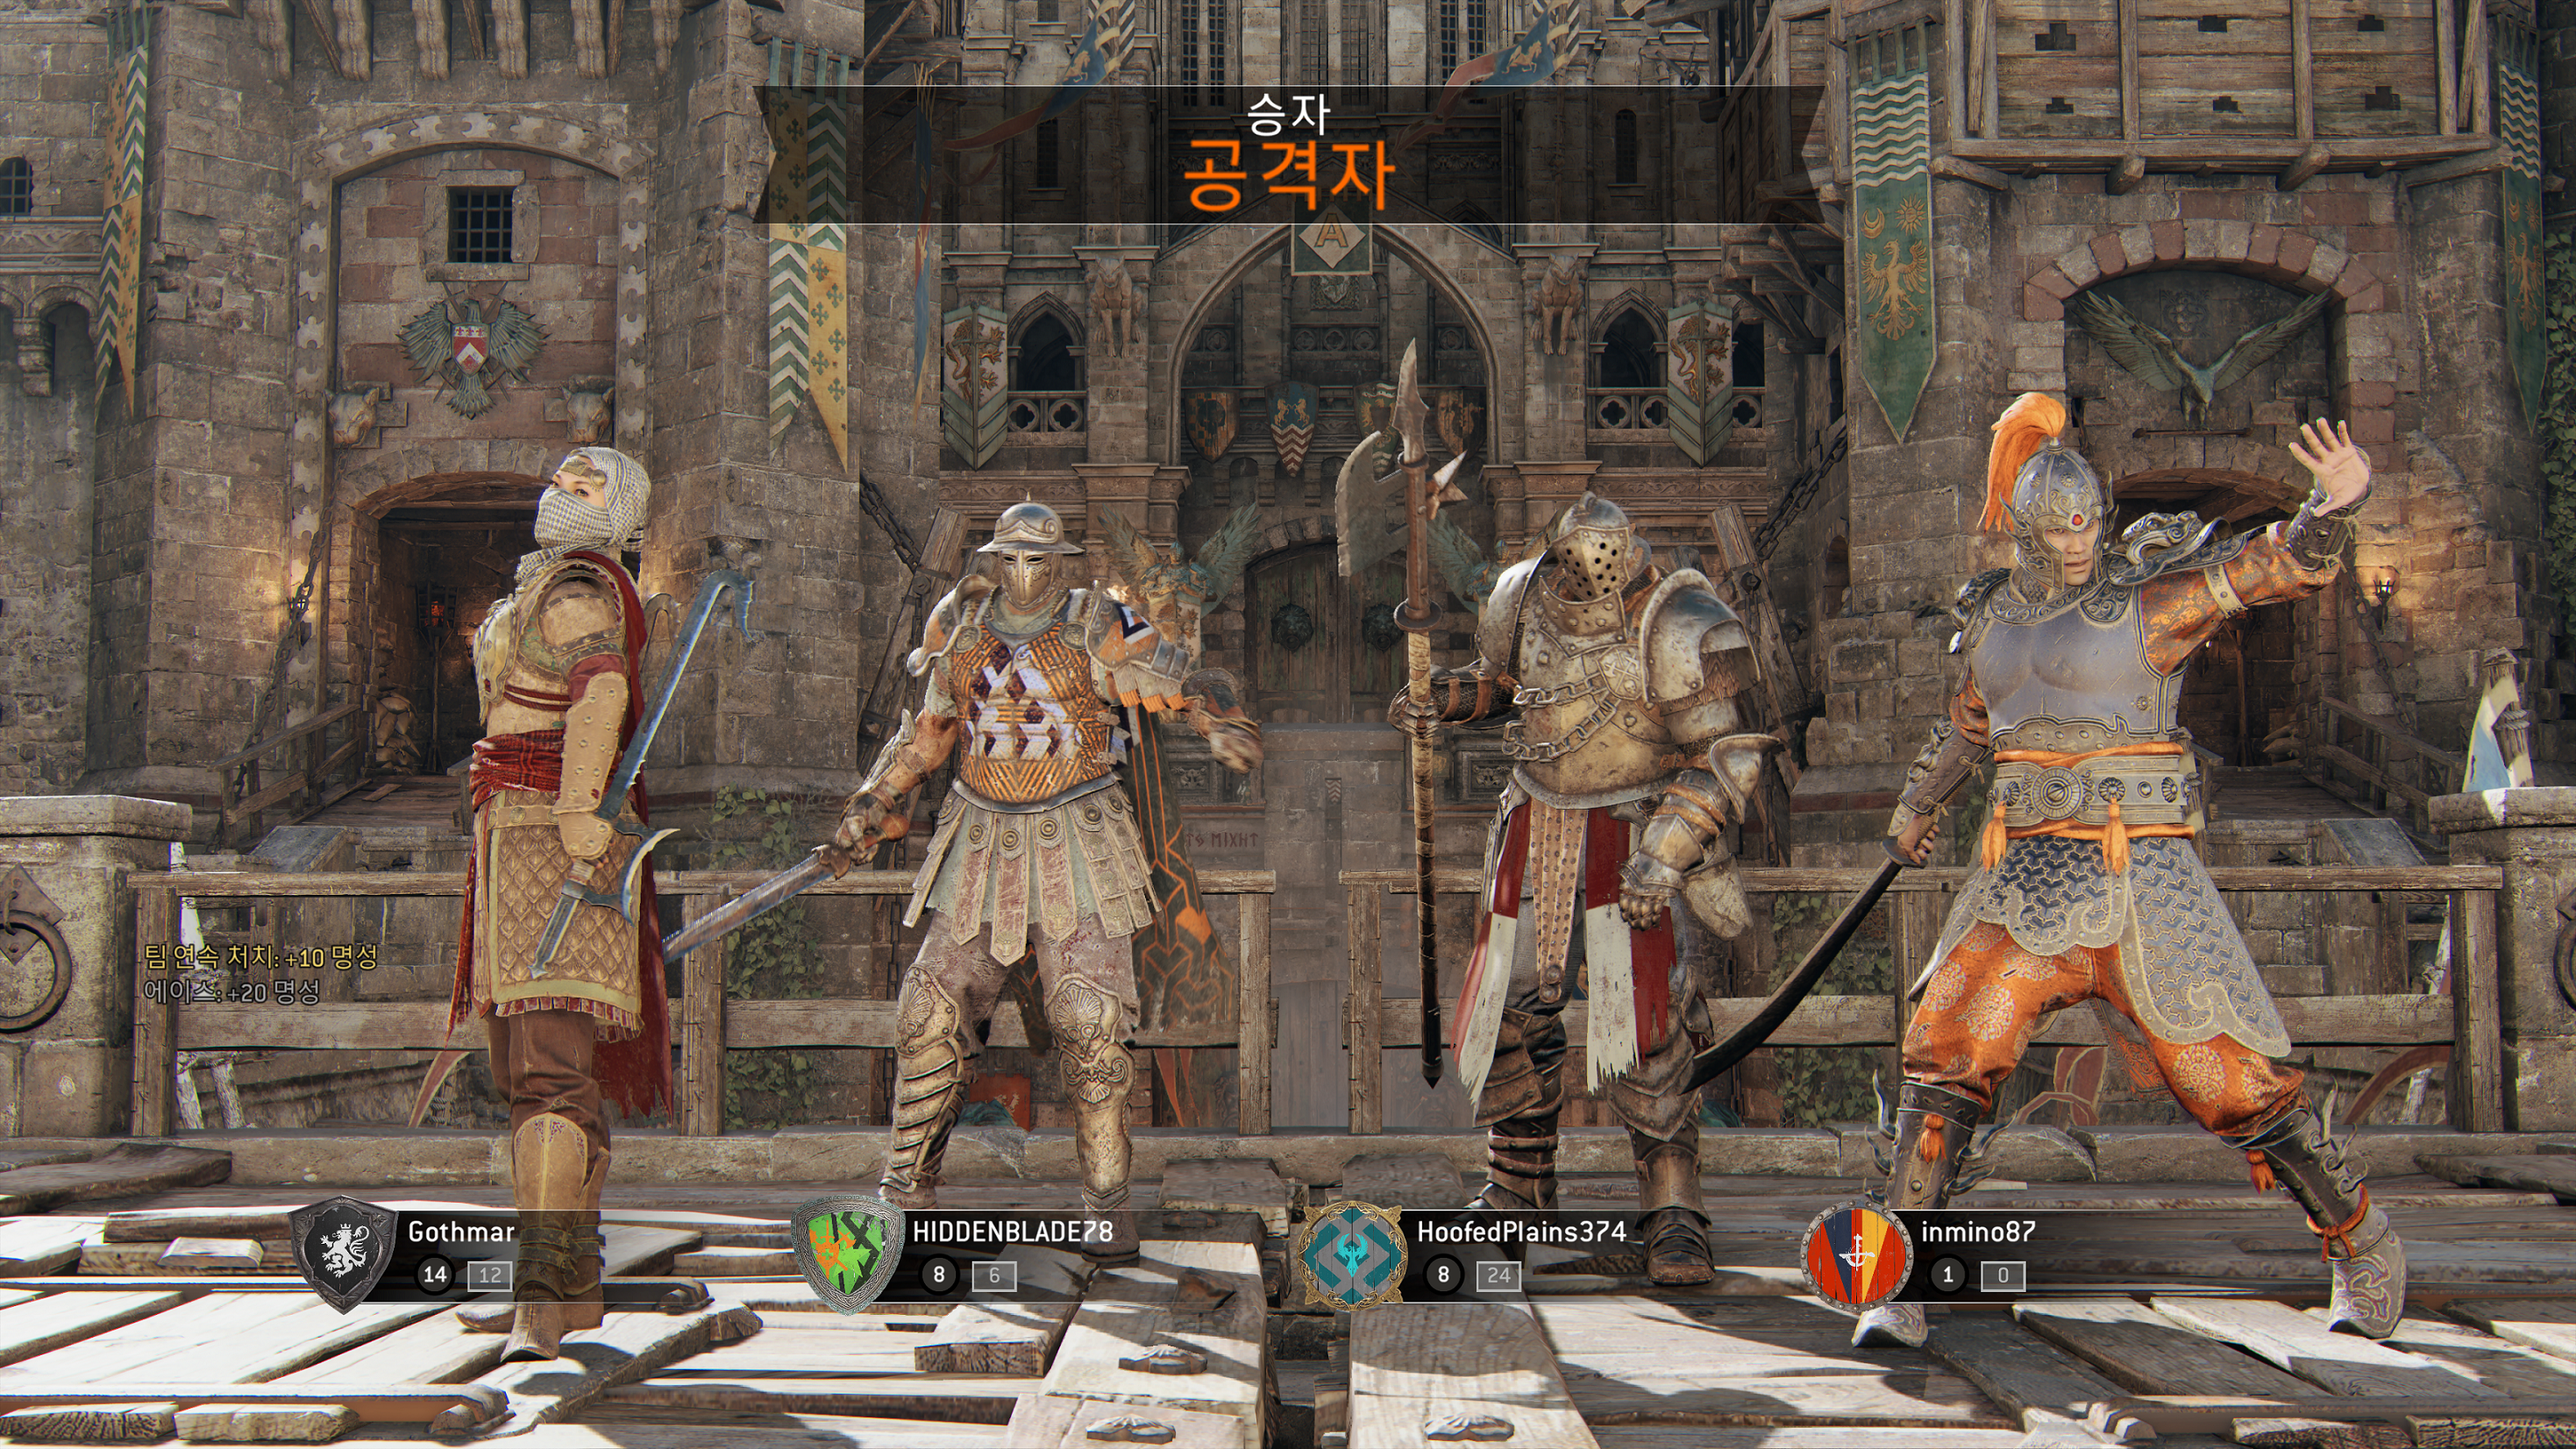 For Honor 2020-08-01 21-06-02.png